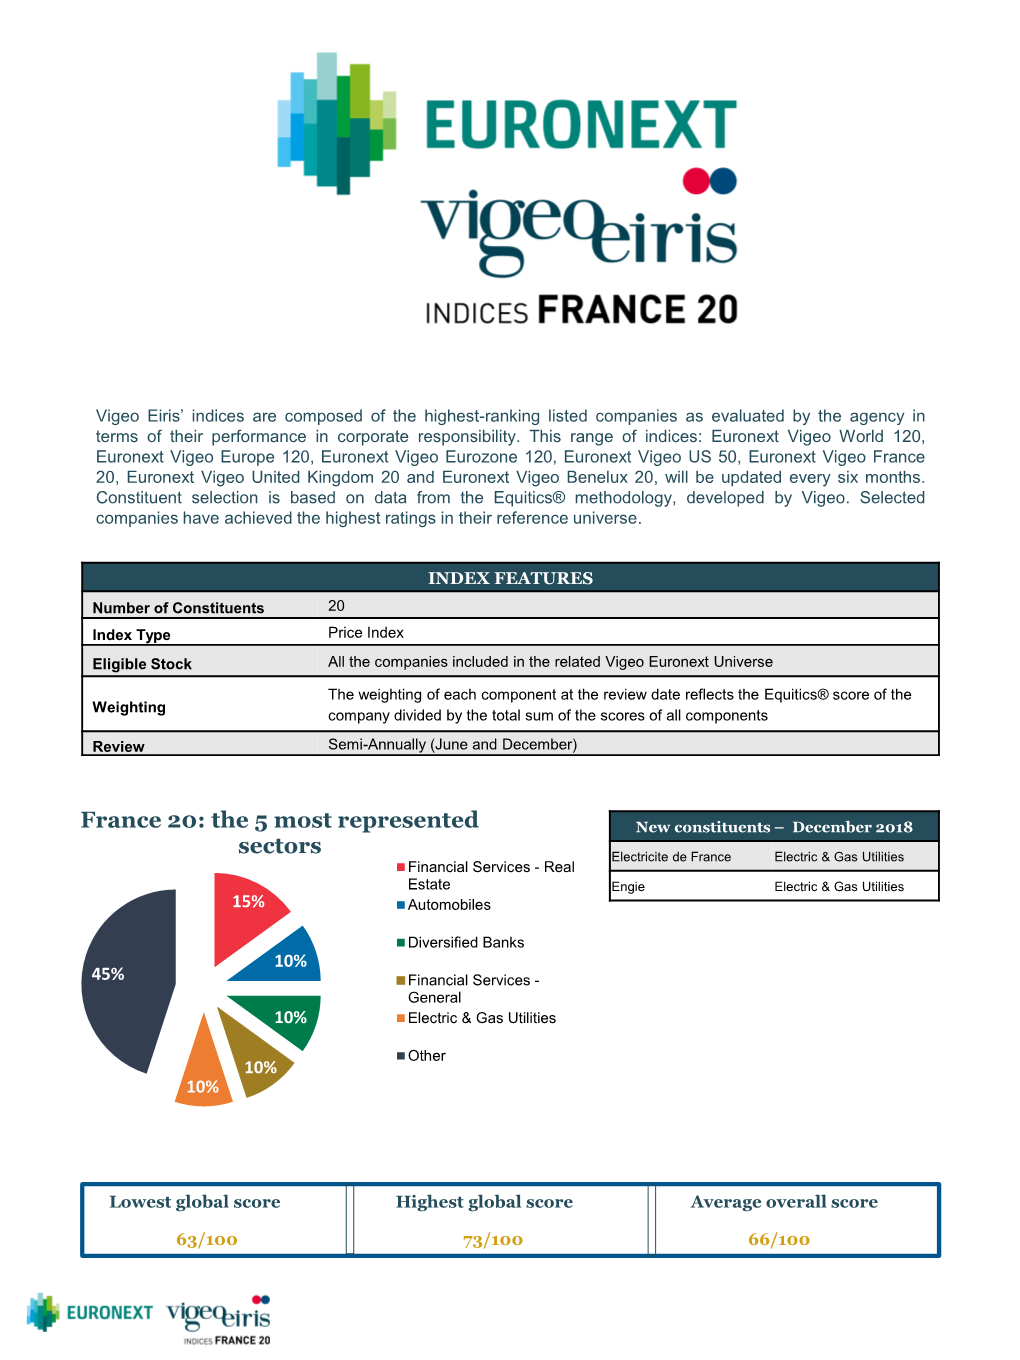 France 20, Euronext Vigeo United Kingdom 20 and Euronext Vigeo Benelux 20, Will Be Updated Every Six Months